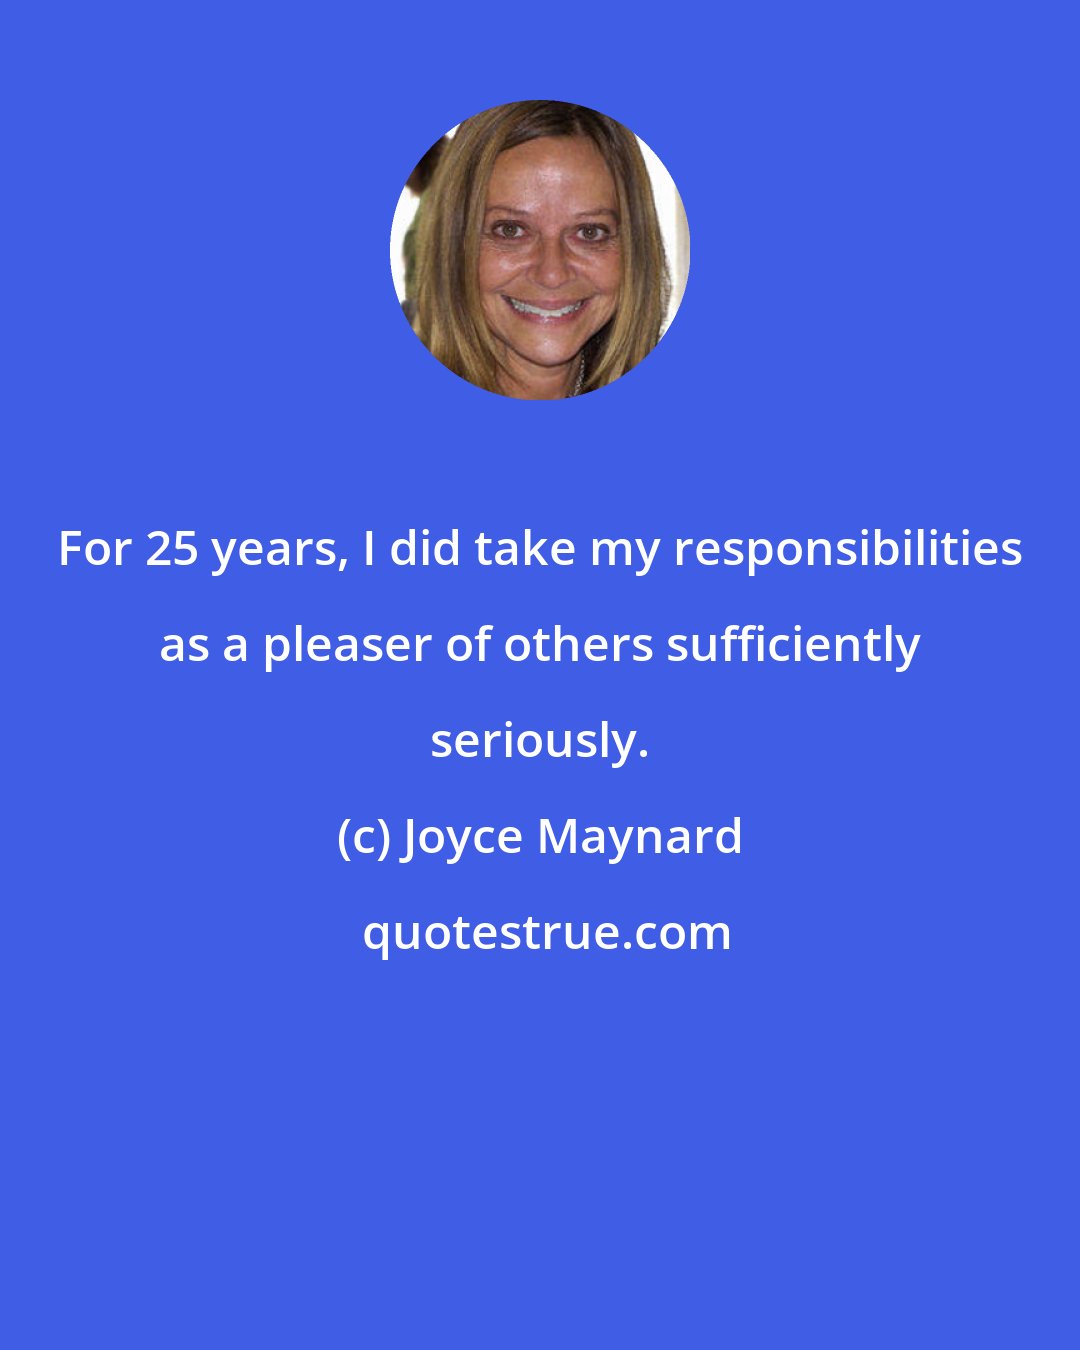 Joyce Maynard: For 25 years, I did take my responsibilities as a pleaser of others sufficiently seriously.